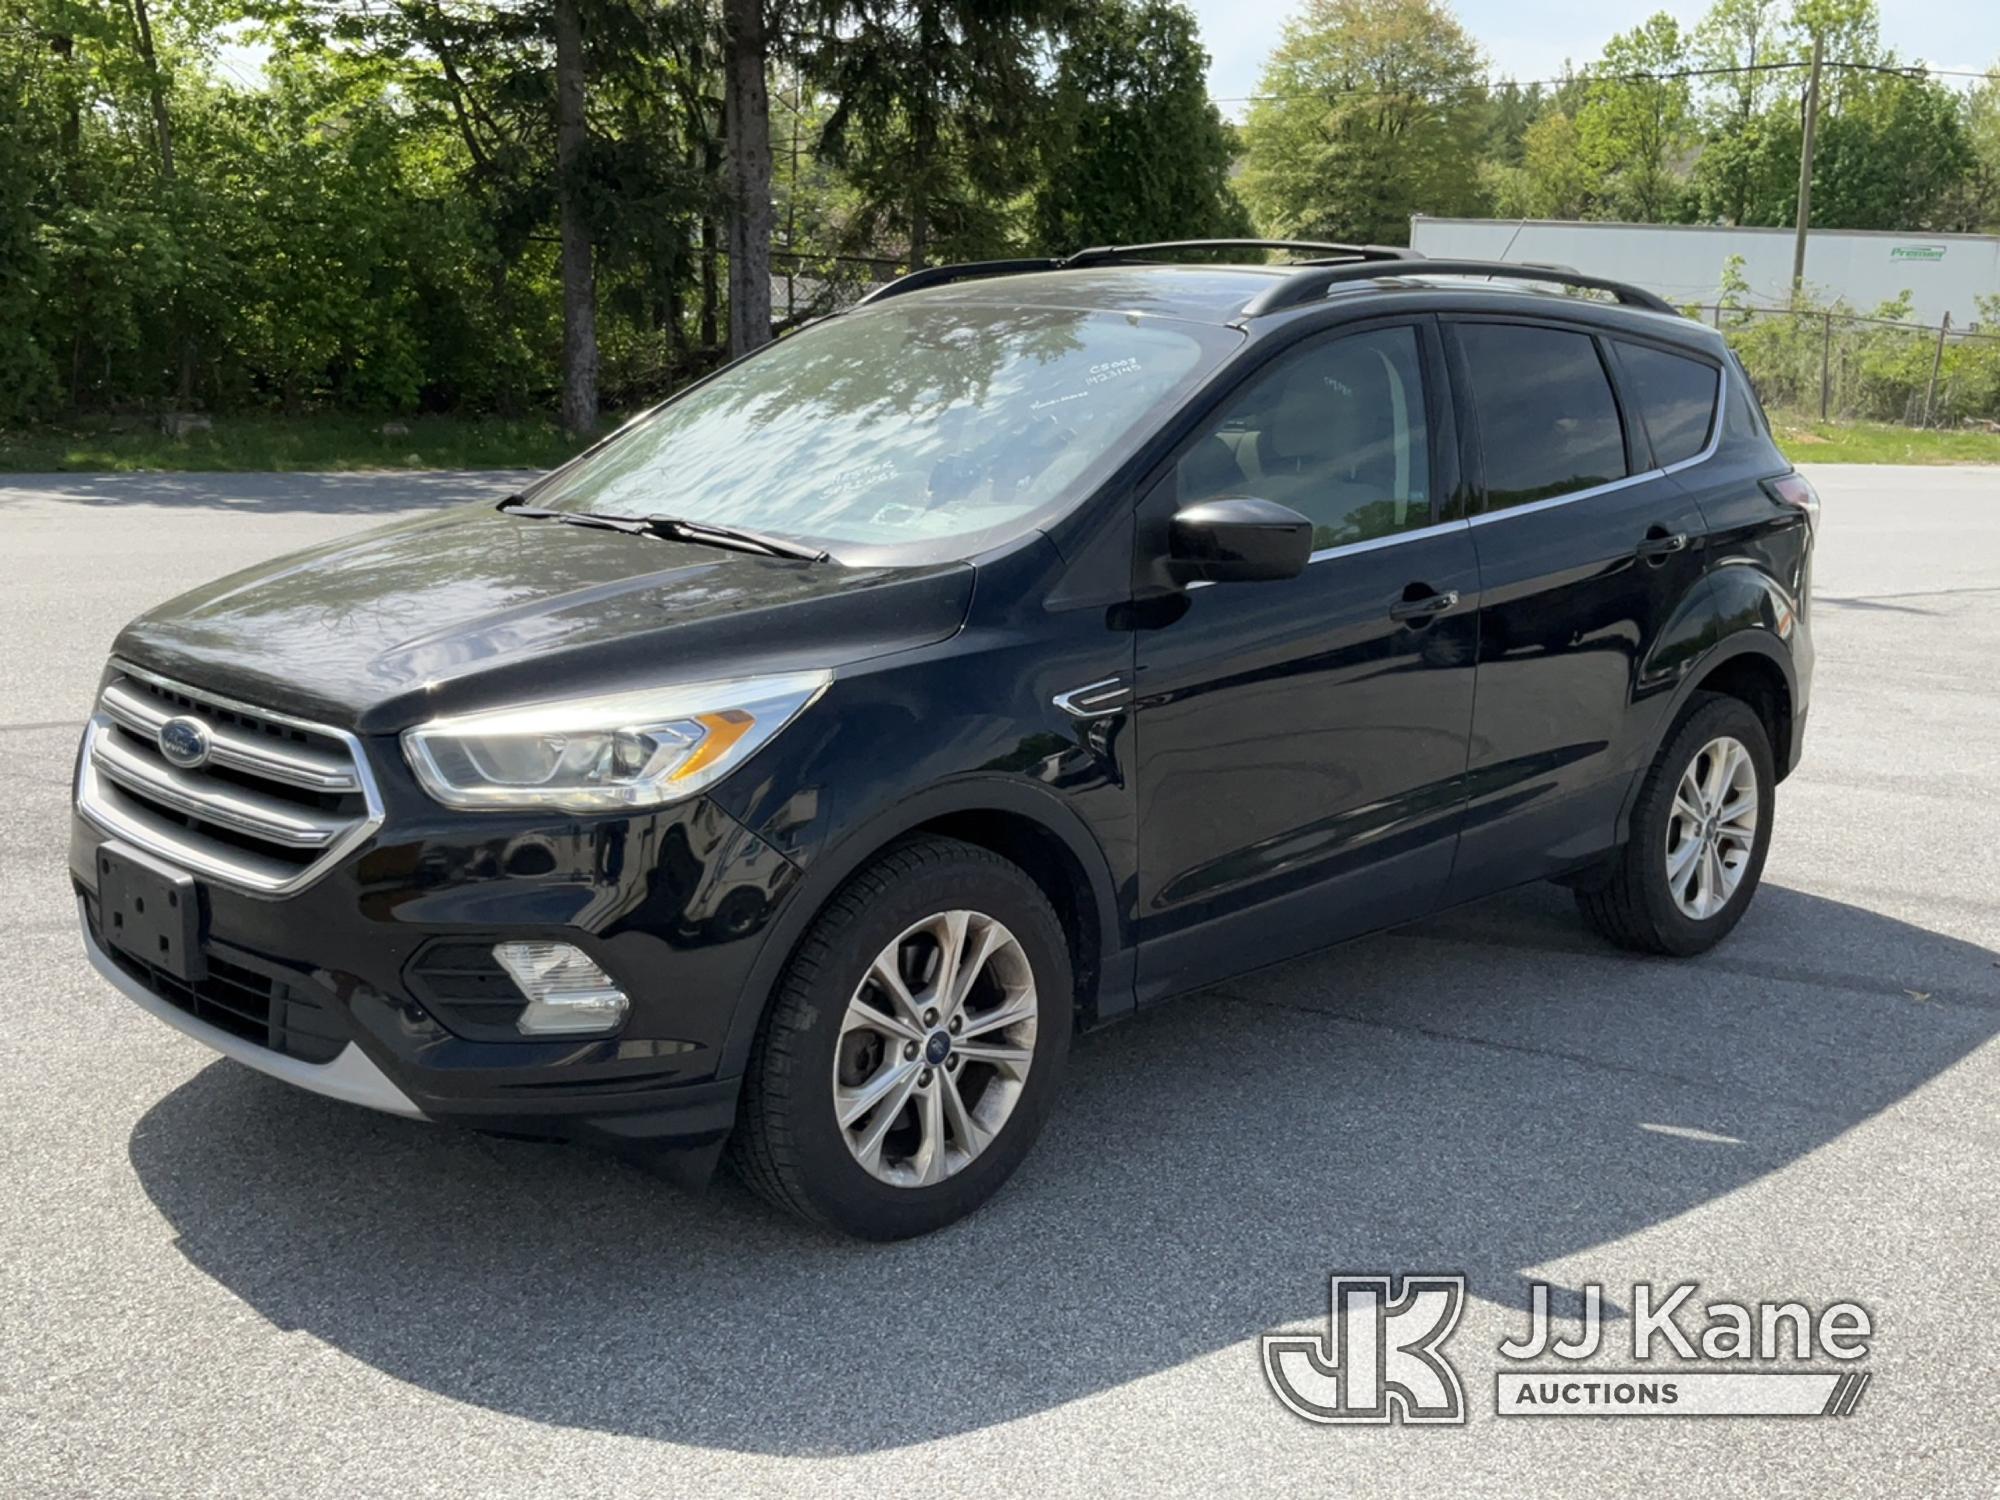 (Chester Springs, PA) 2017 Ford Escape 4x4 4-Door Sport Utility Vehicle Runs & Moves) (Body & Rust D